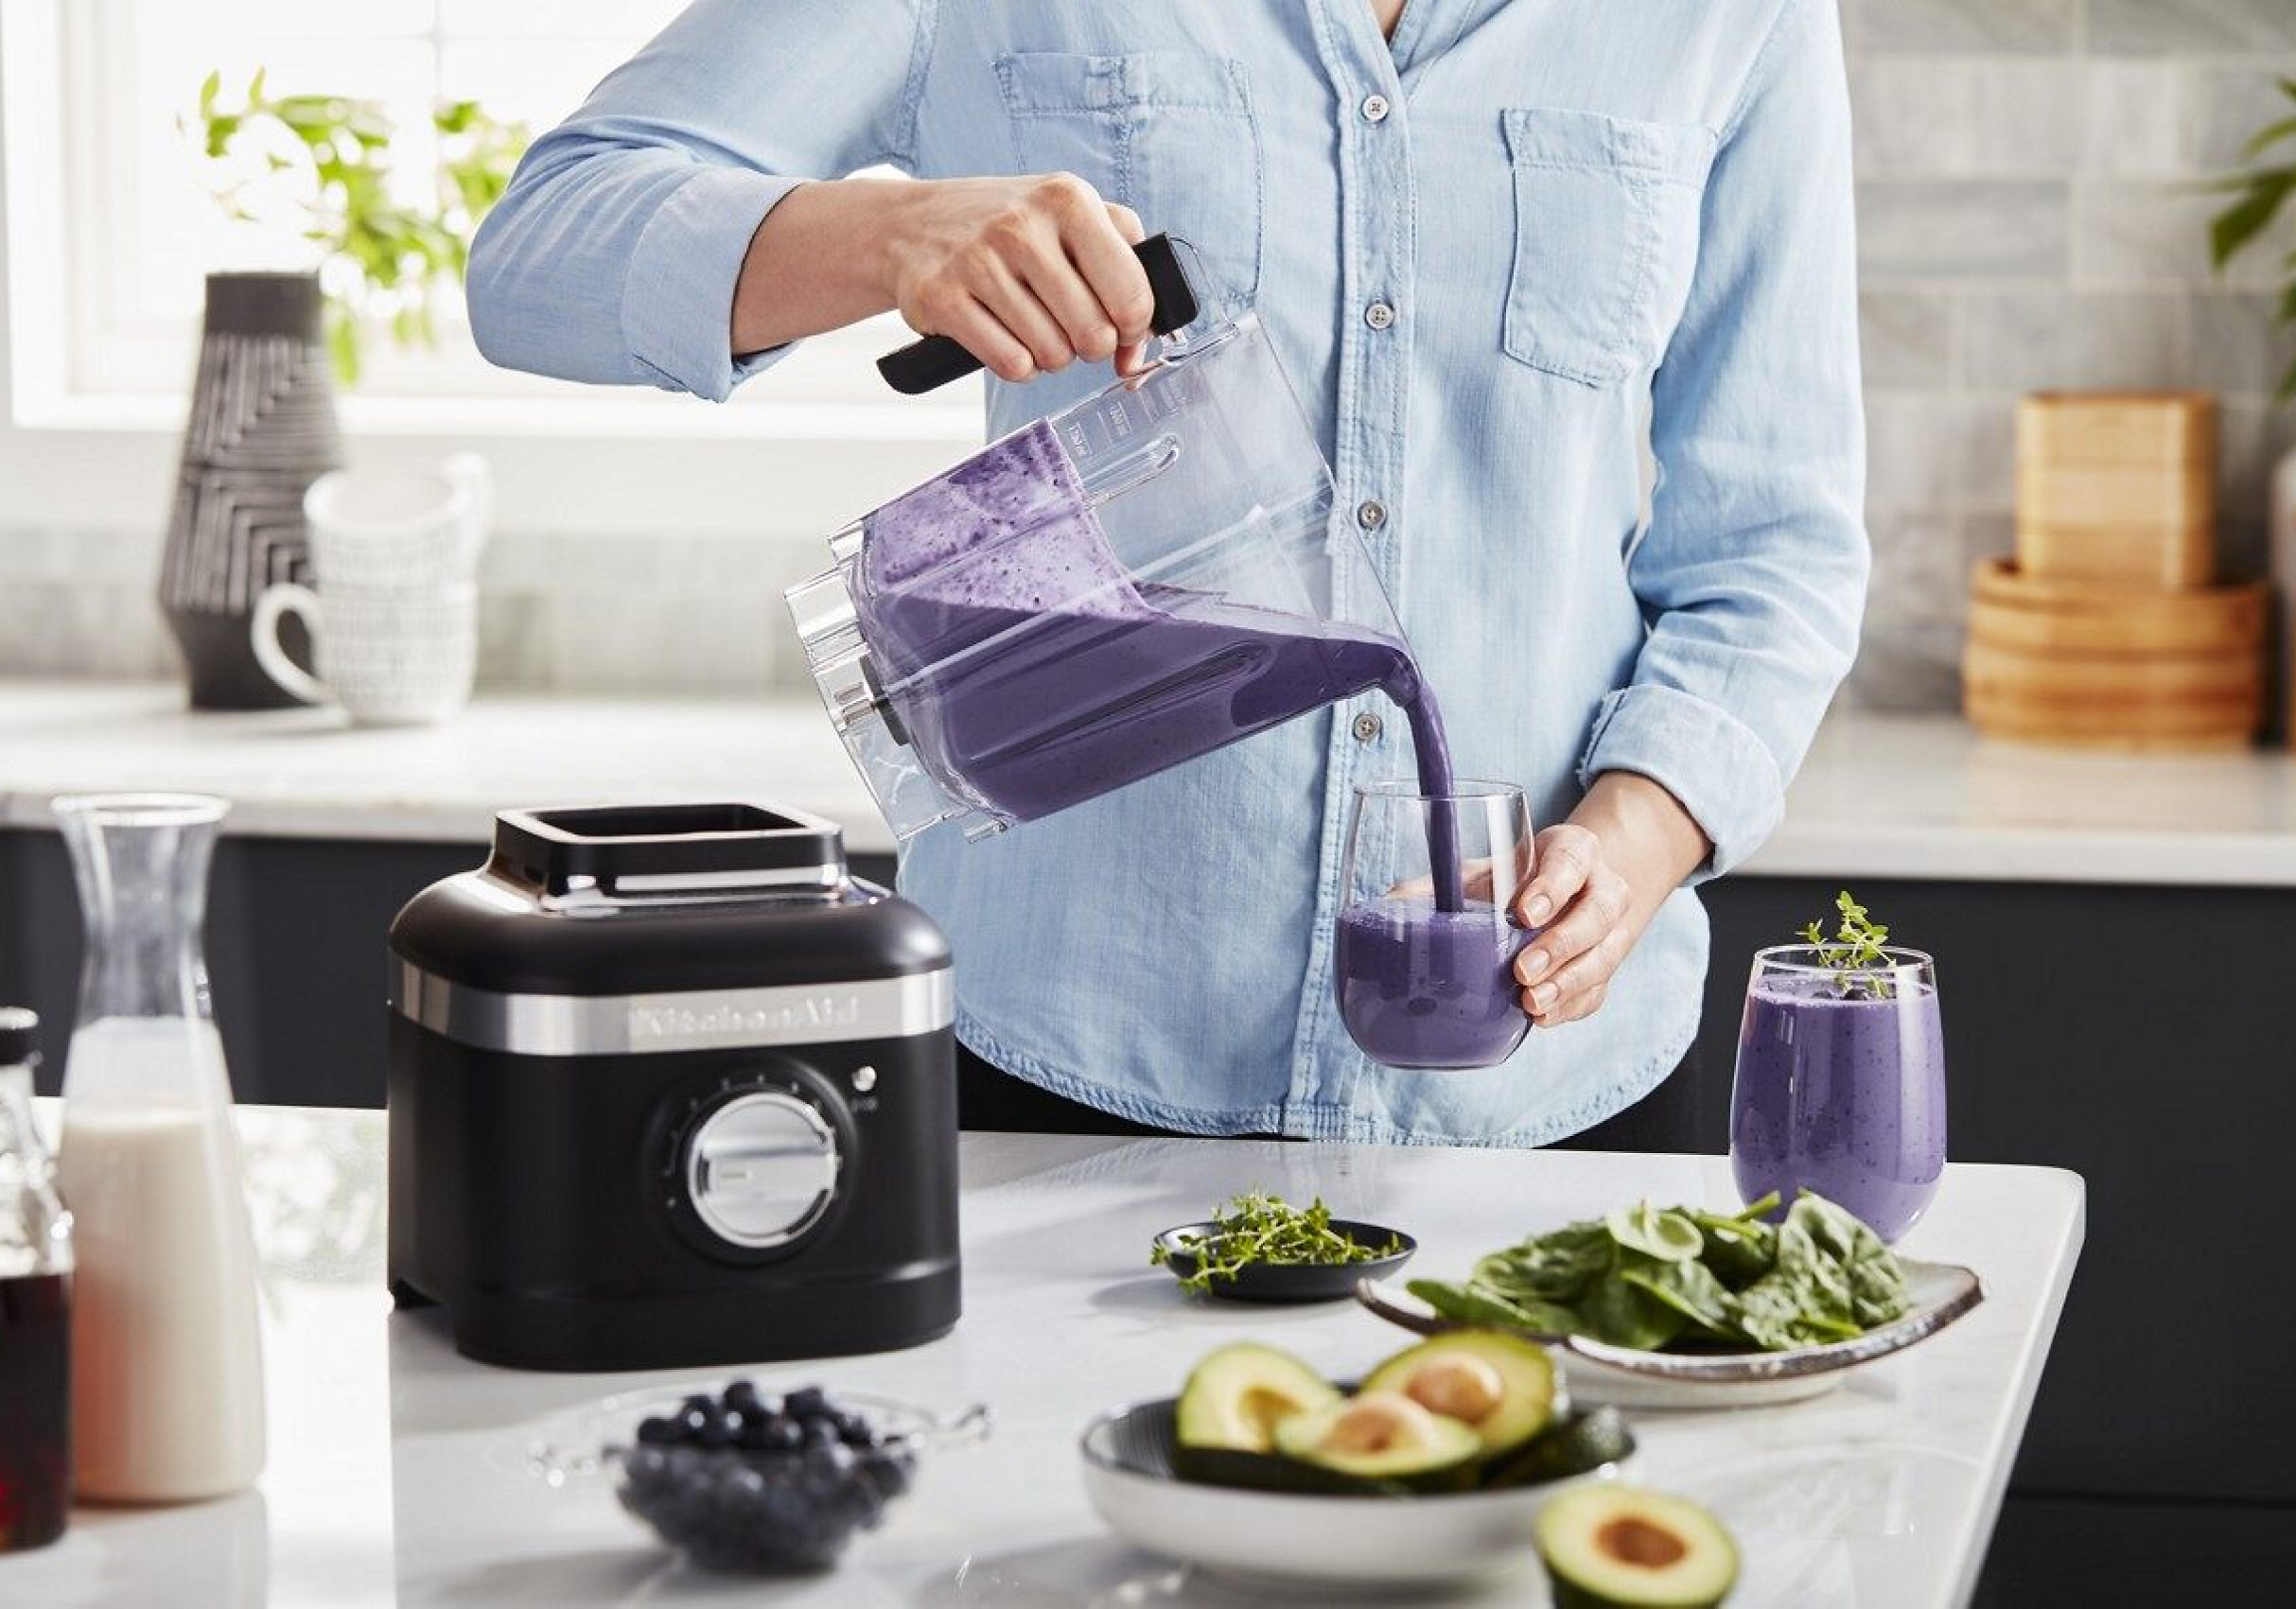 Food Processor vs Blender: What's The Difference? KitchenAid